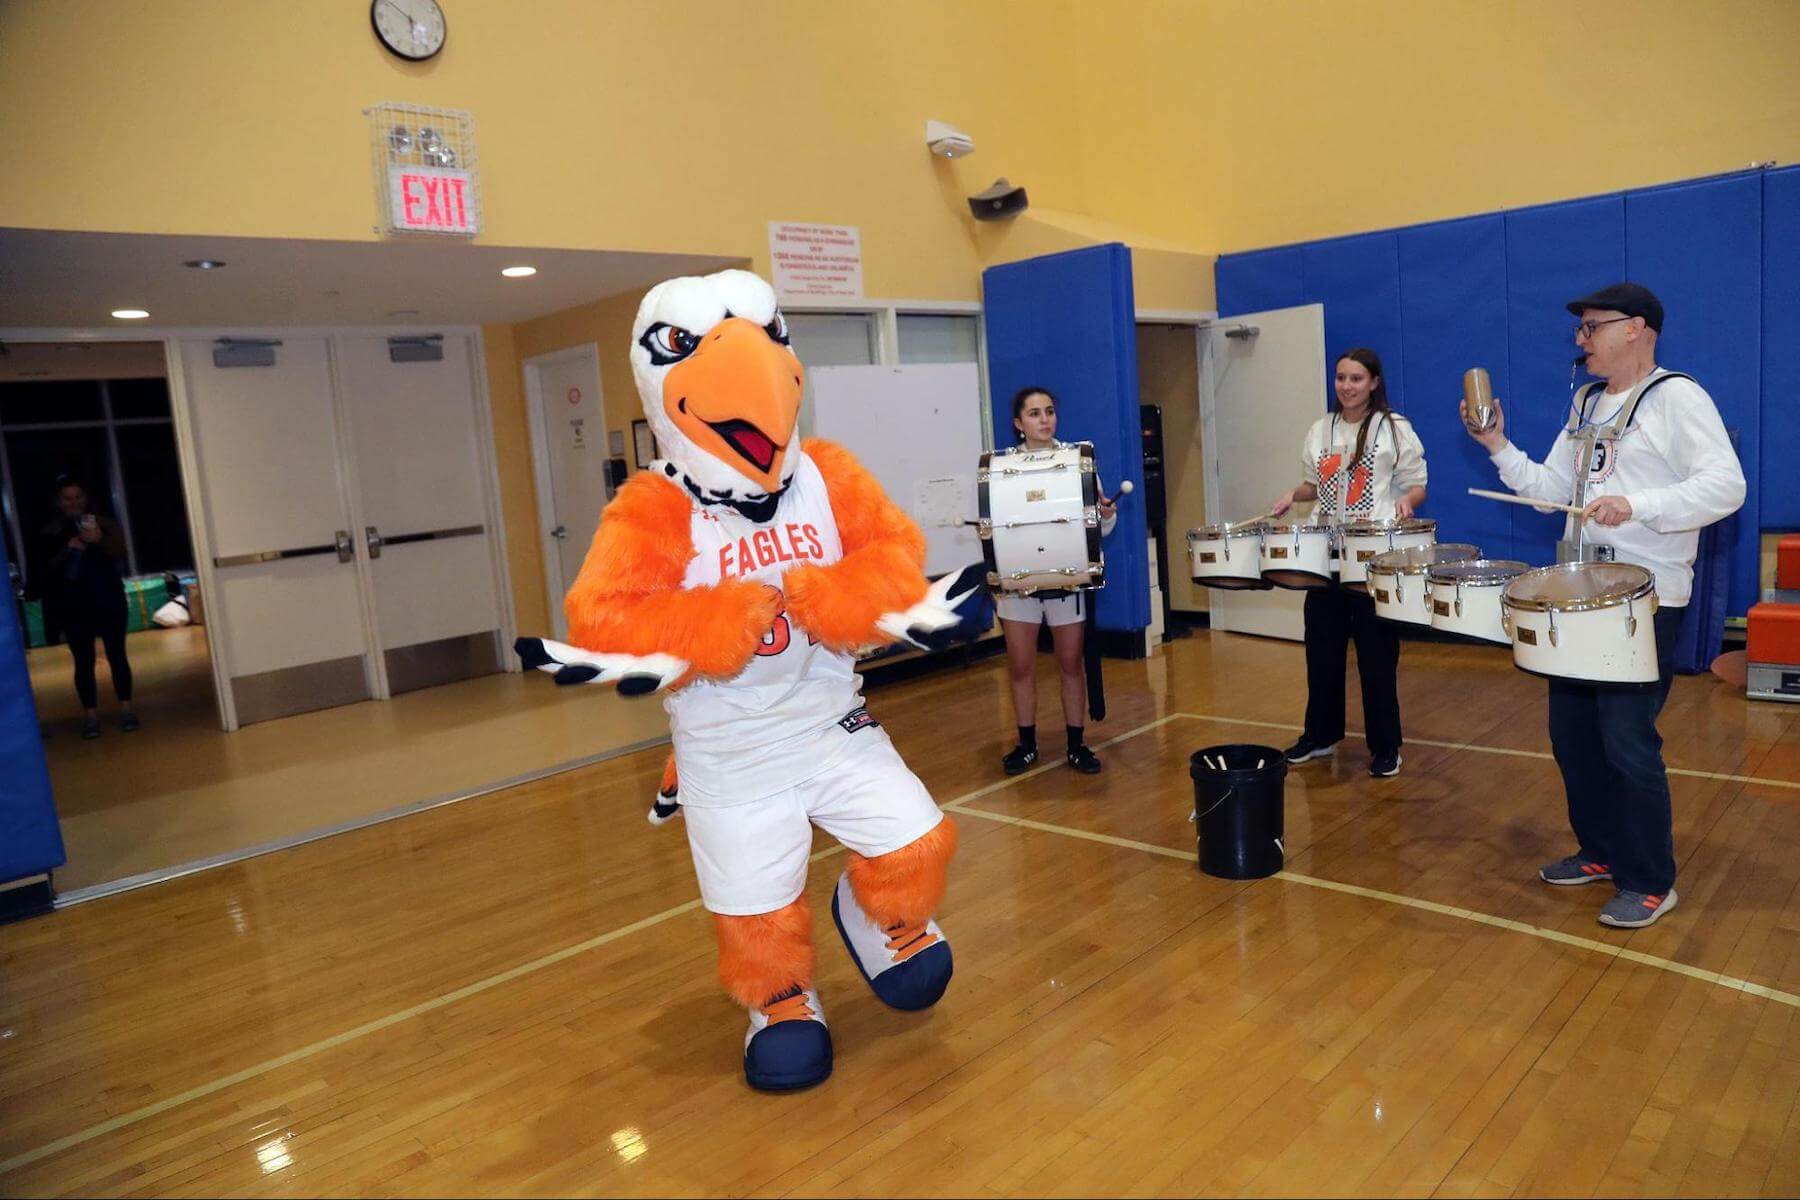 Ethical Culture Fieldston School athletes play at Winterfest.